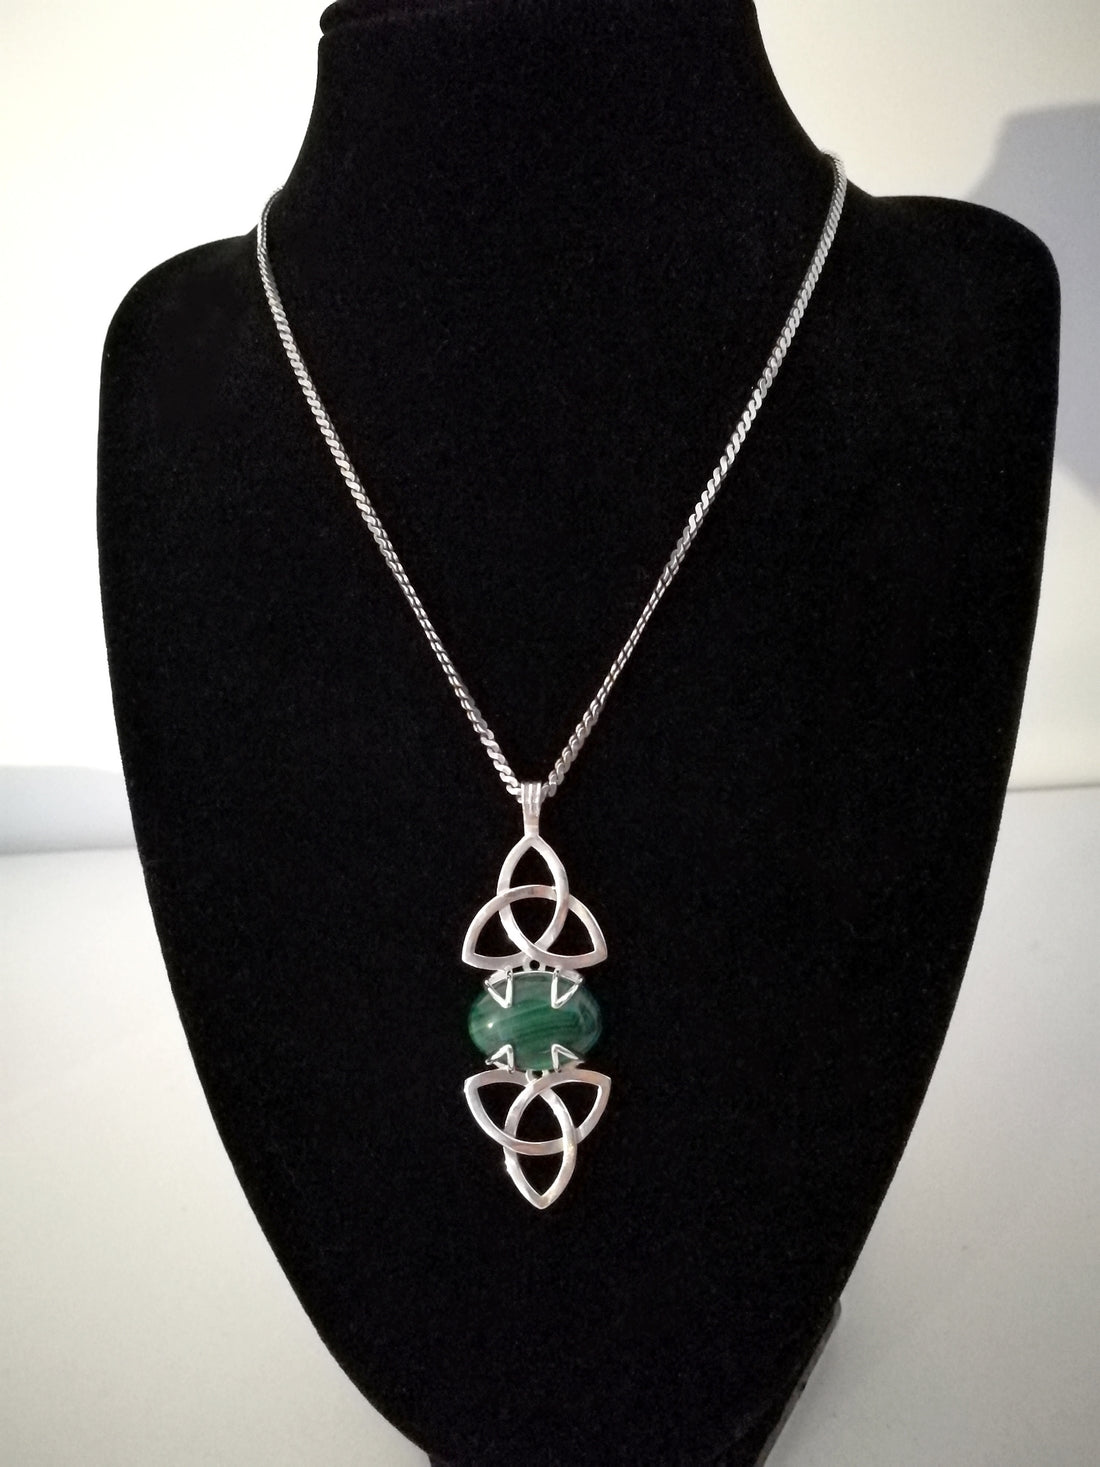 Celtic Love Knot Emerald Necklace Gold Jewelry Celtic Necklace Outlander  Jewelry Scottish Gifts. Gold Necklace Birthstone Jewelry Bride Gift - Etsy